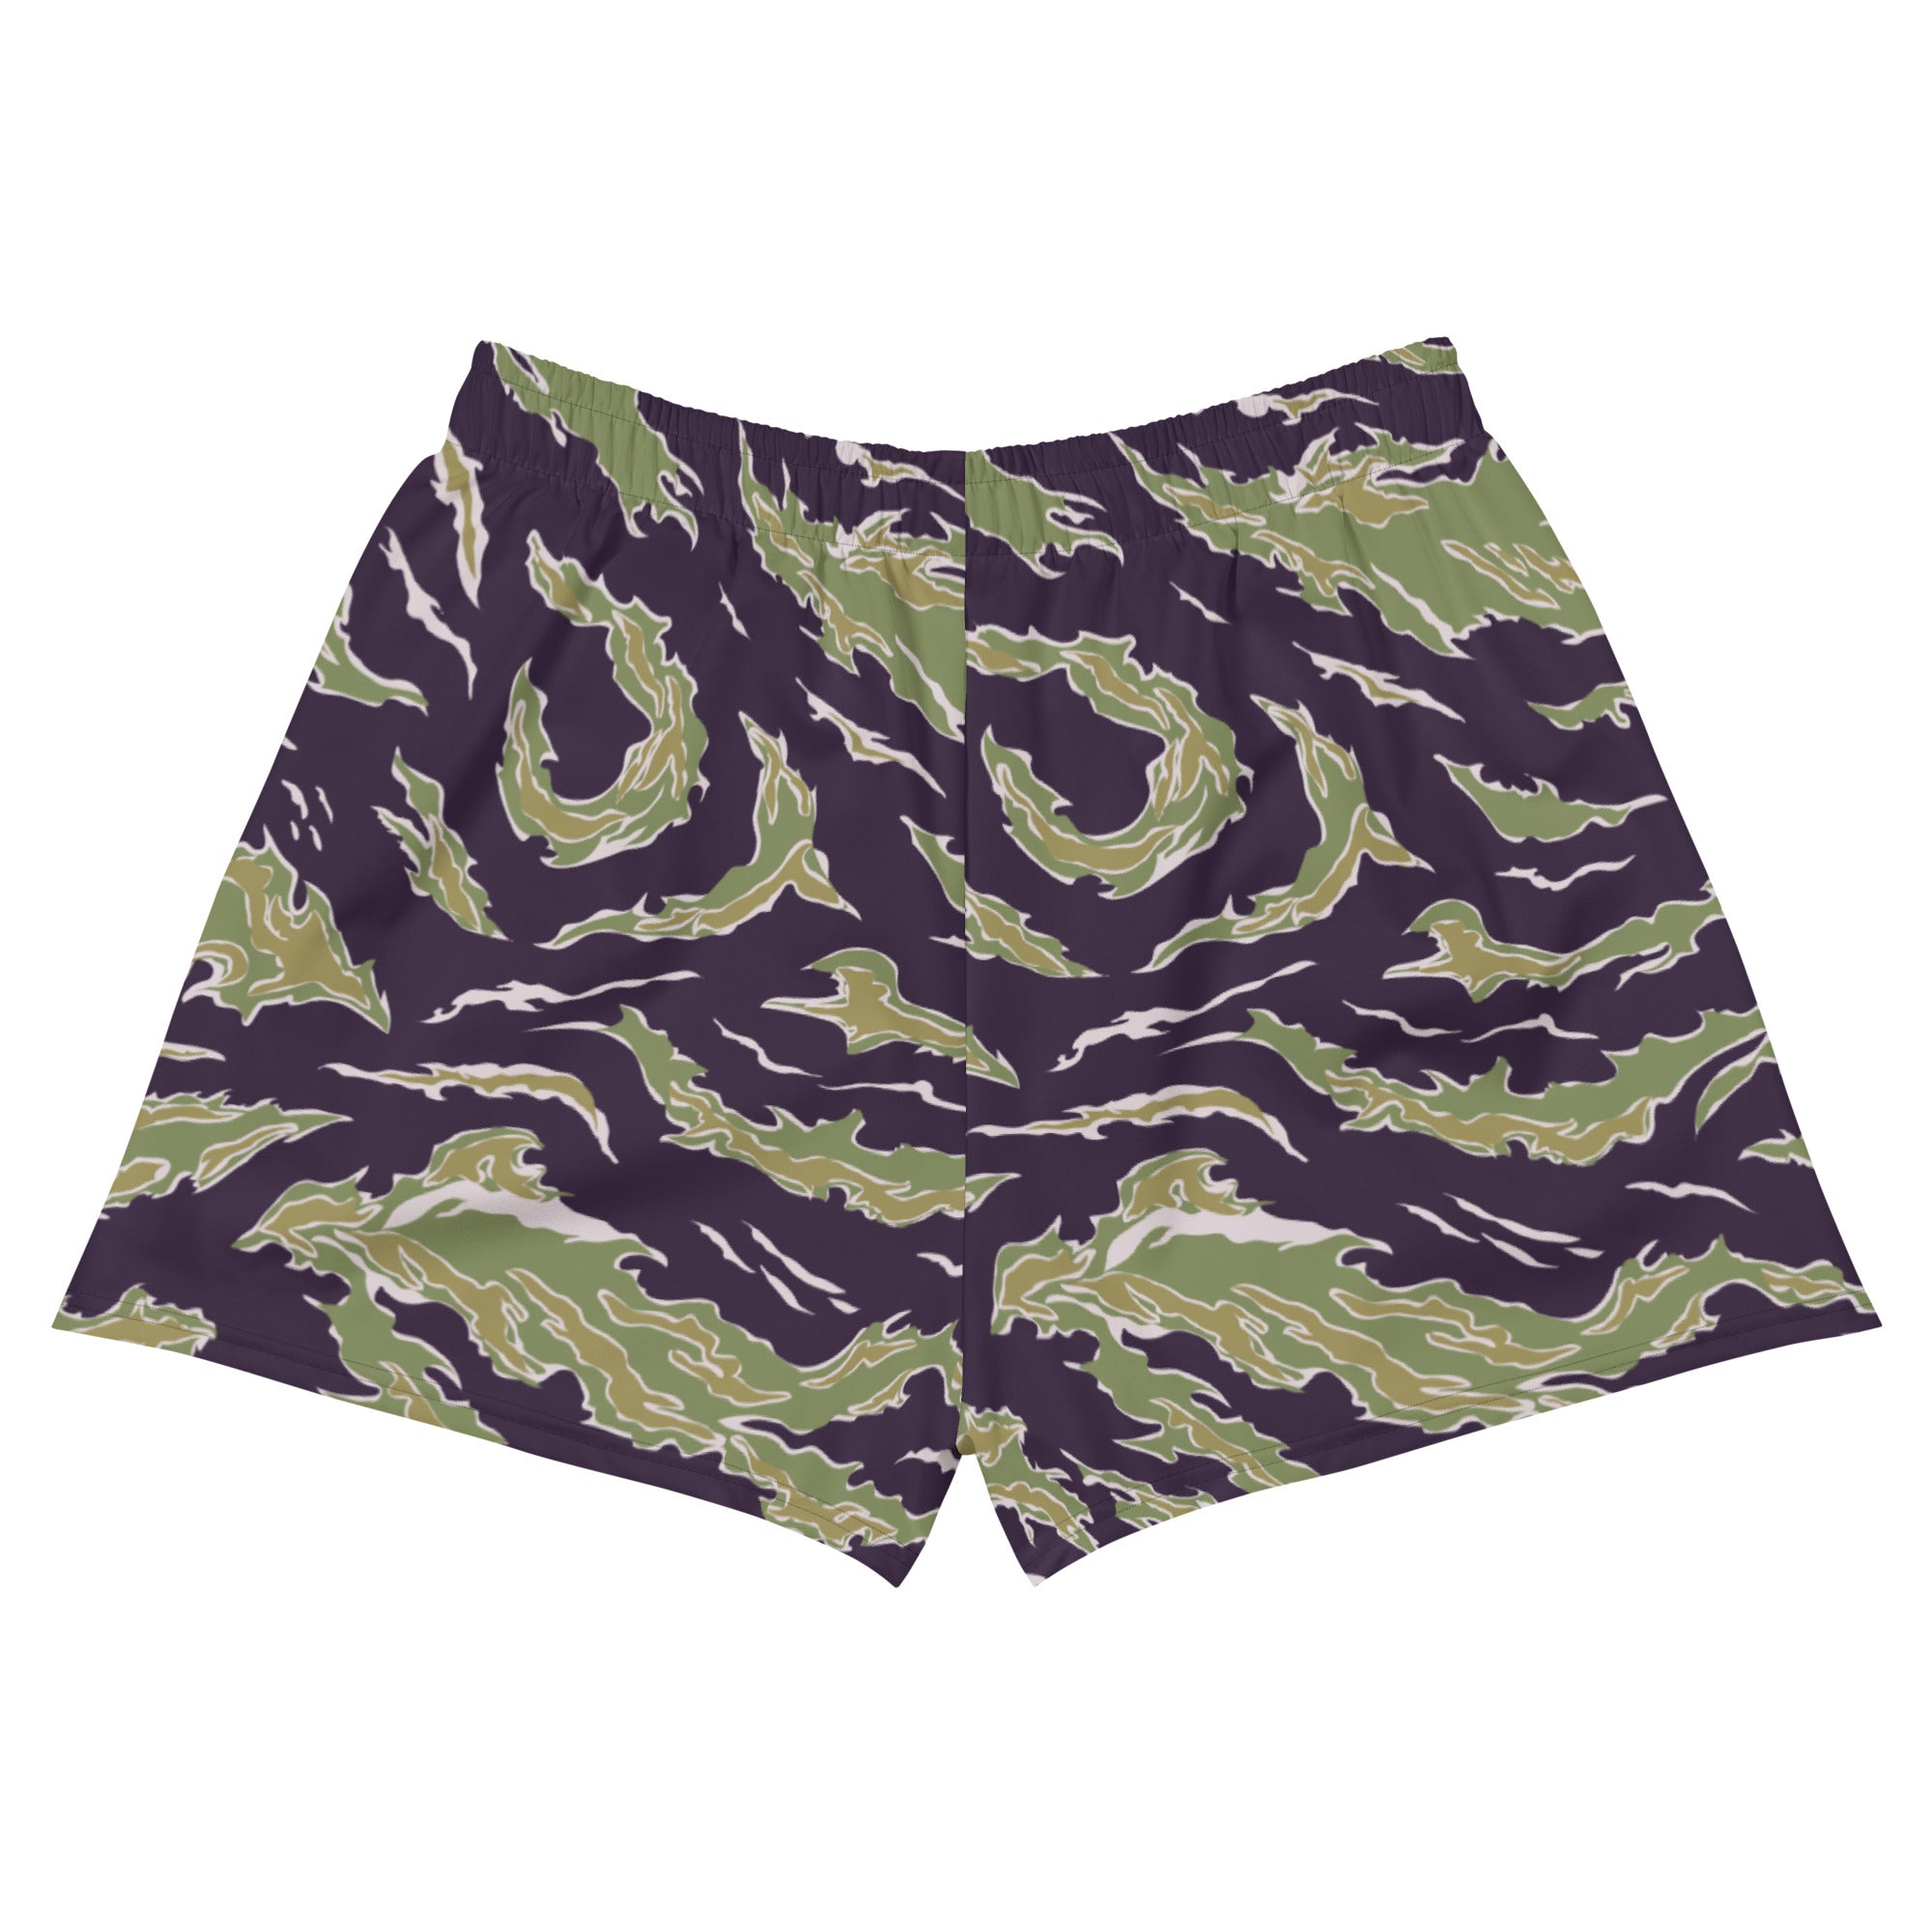 Tiger Stripe Camo Women’s Recycled Athletic Shorts